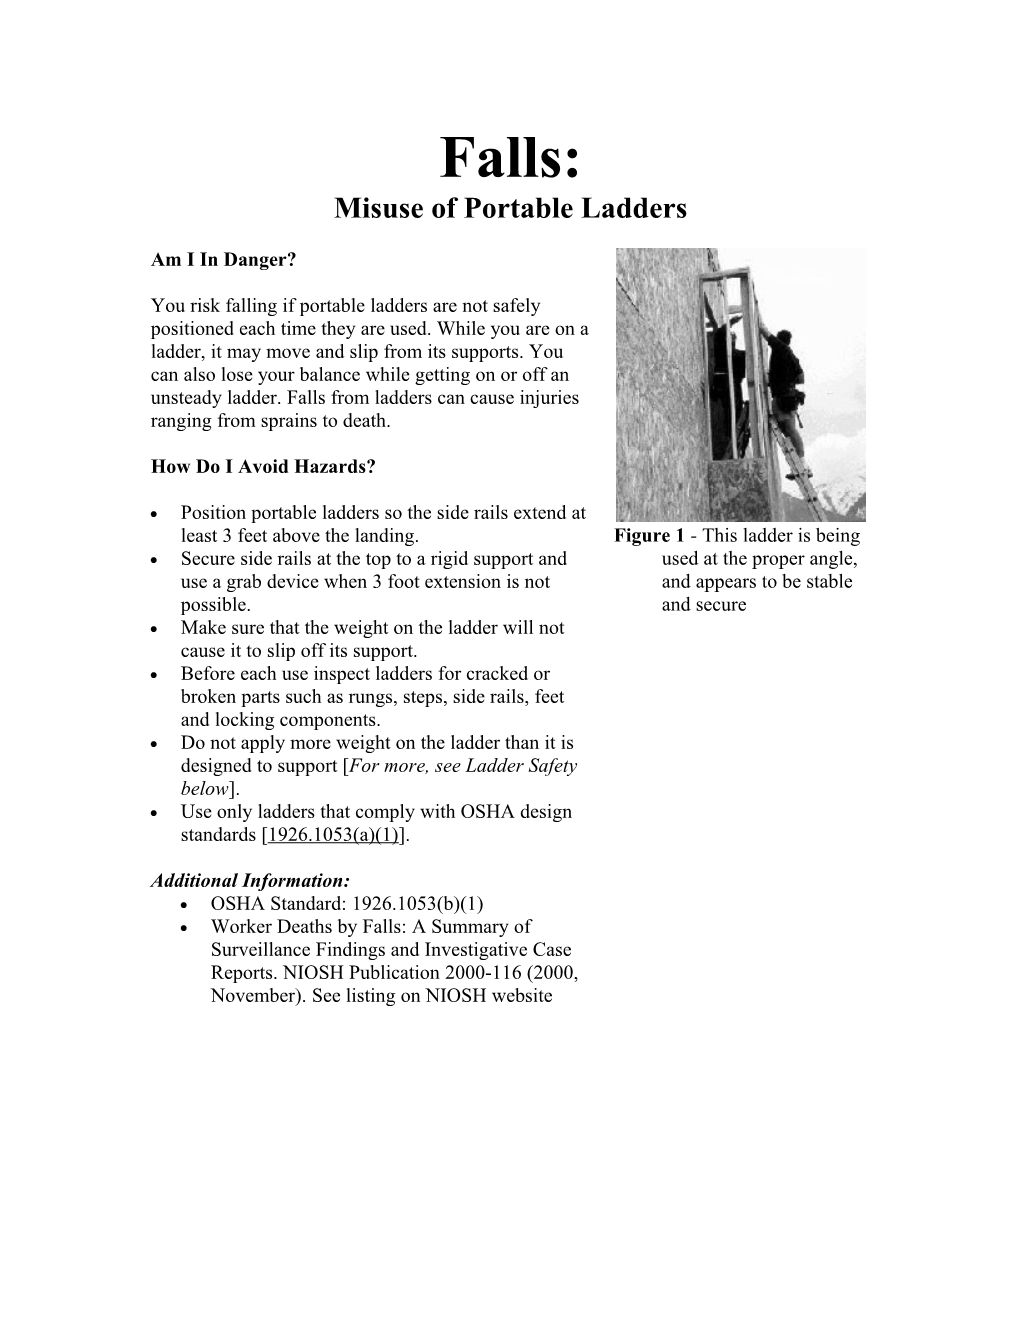 Falls: Misuse of Portable Ladders